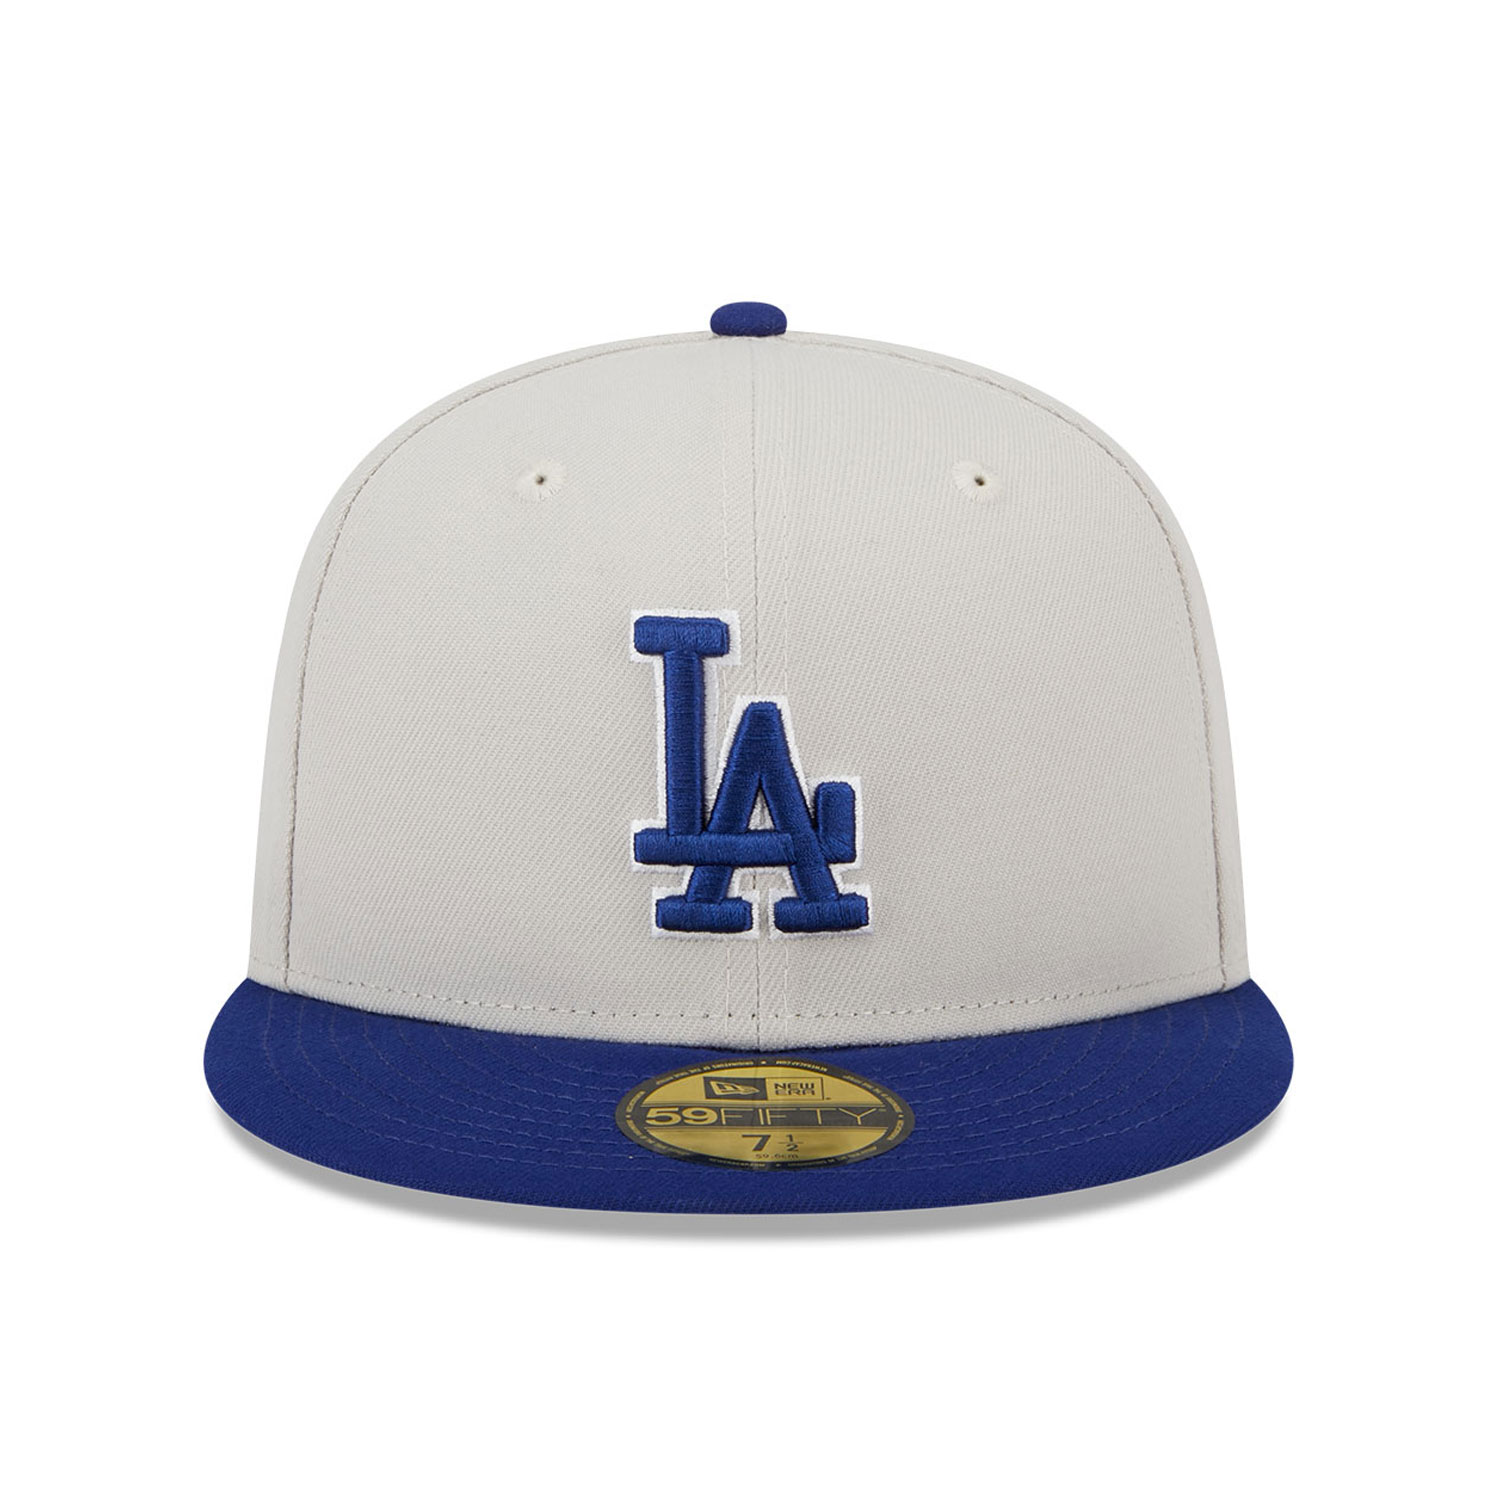 Official New Era Varsity Letter LA Dodgers 59FIFTY Fitted Cap C125_224 ...